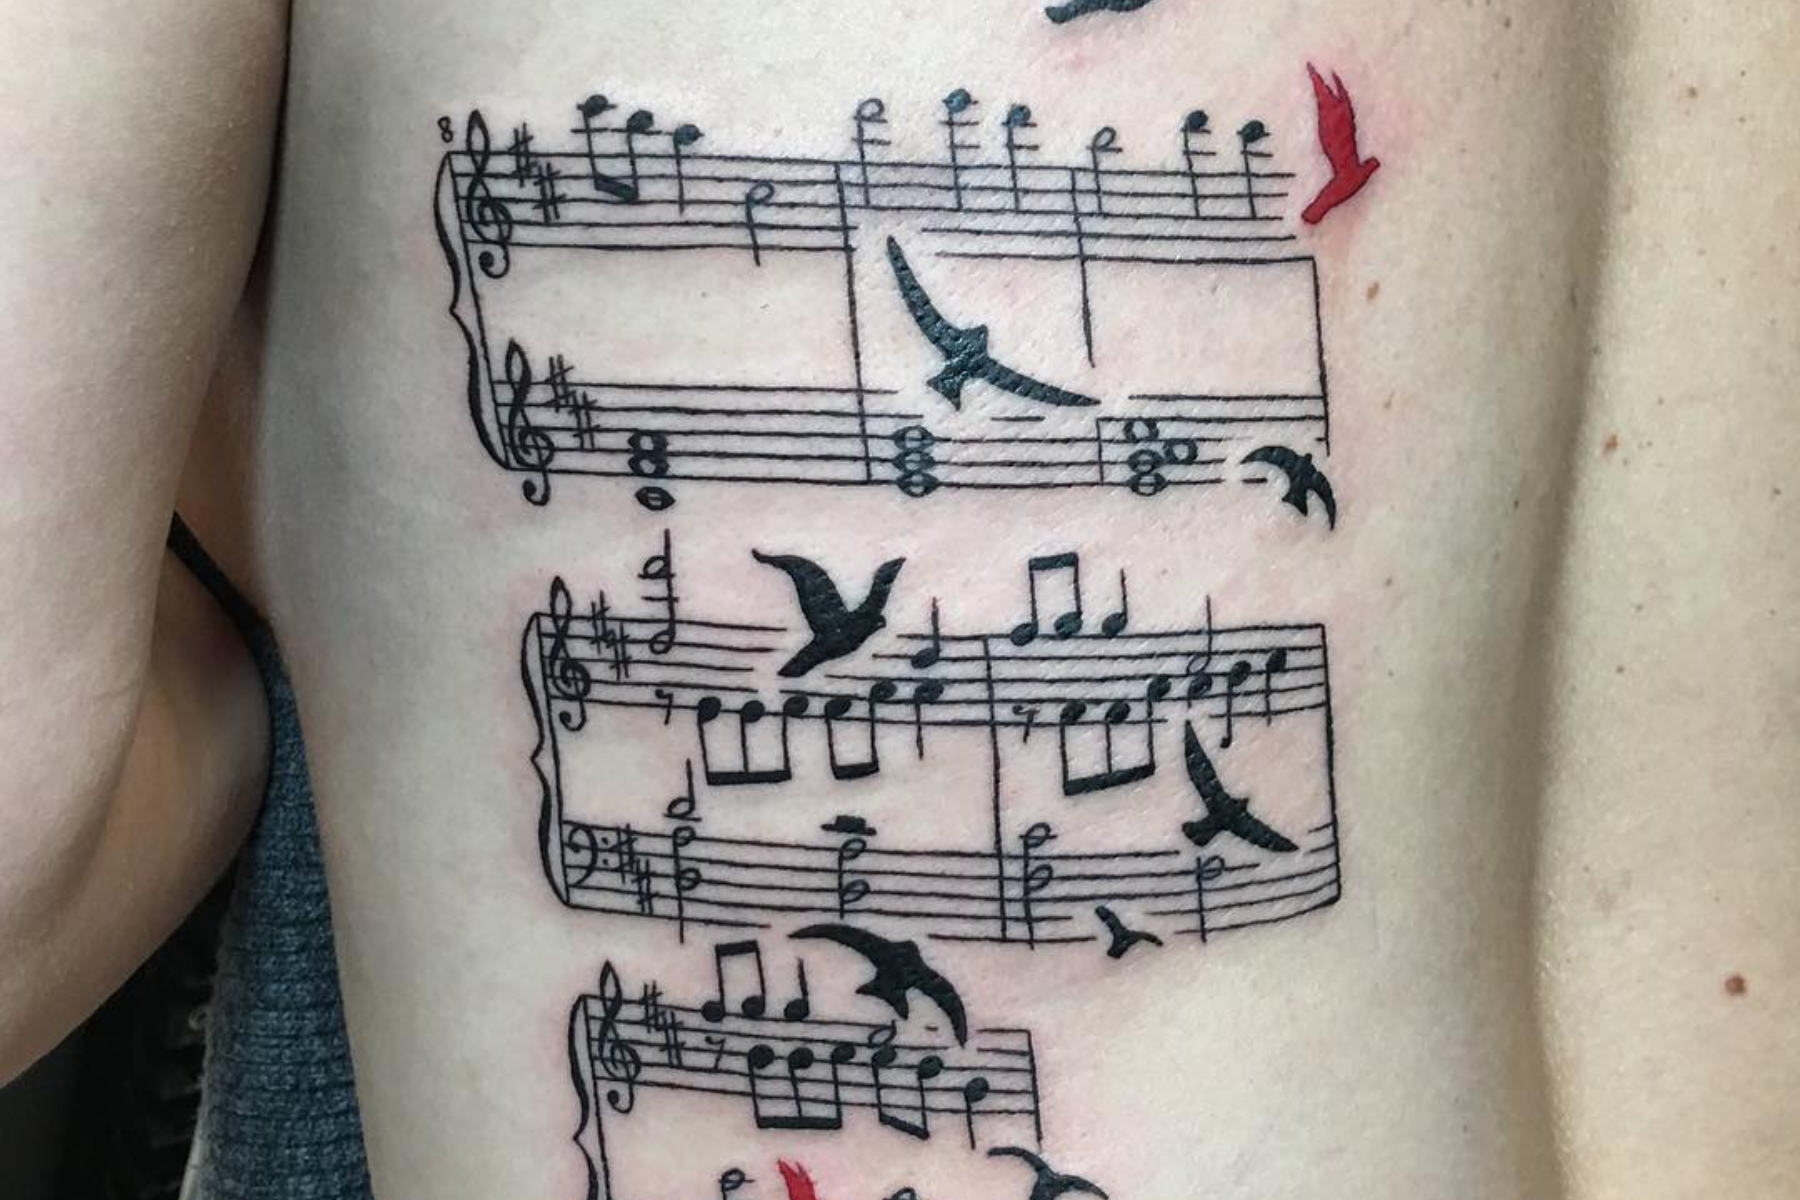 New music tat done by Sworup at Thug Life Tattoos in Melbourne. Thoughts? :  r/tattoo